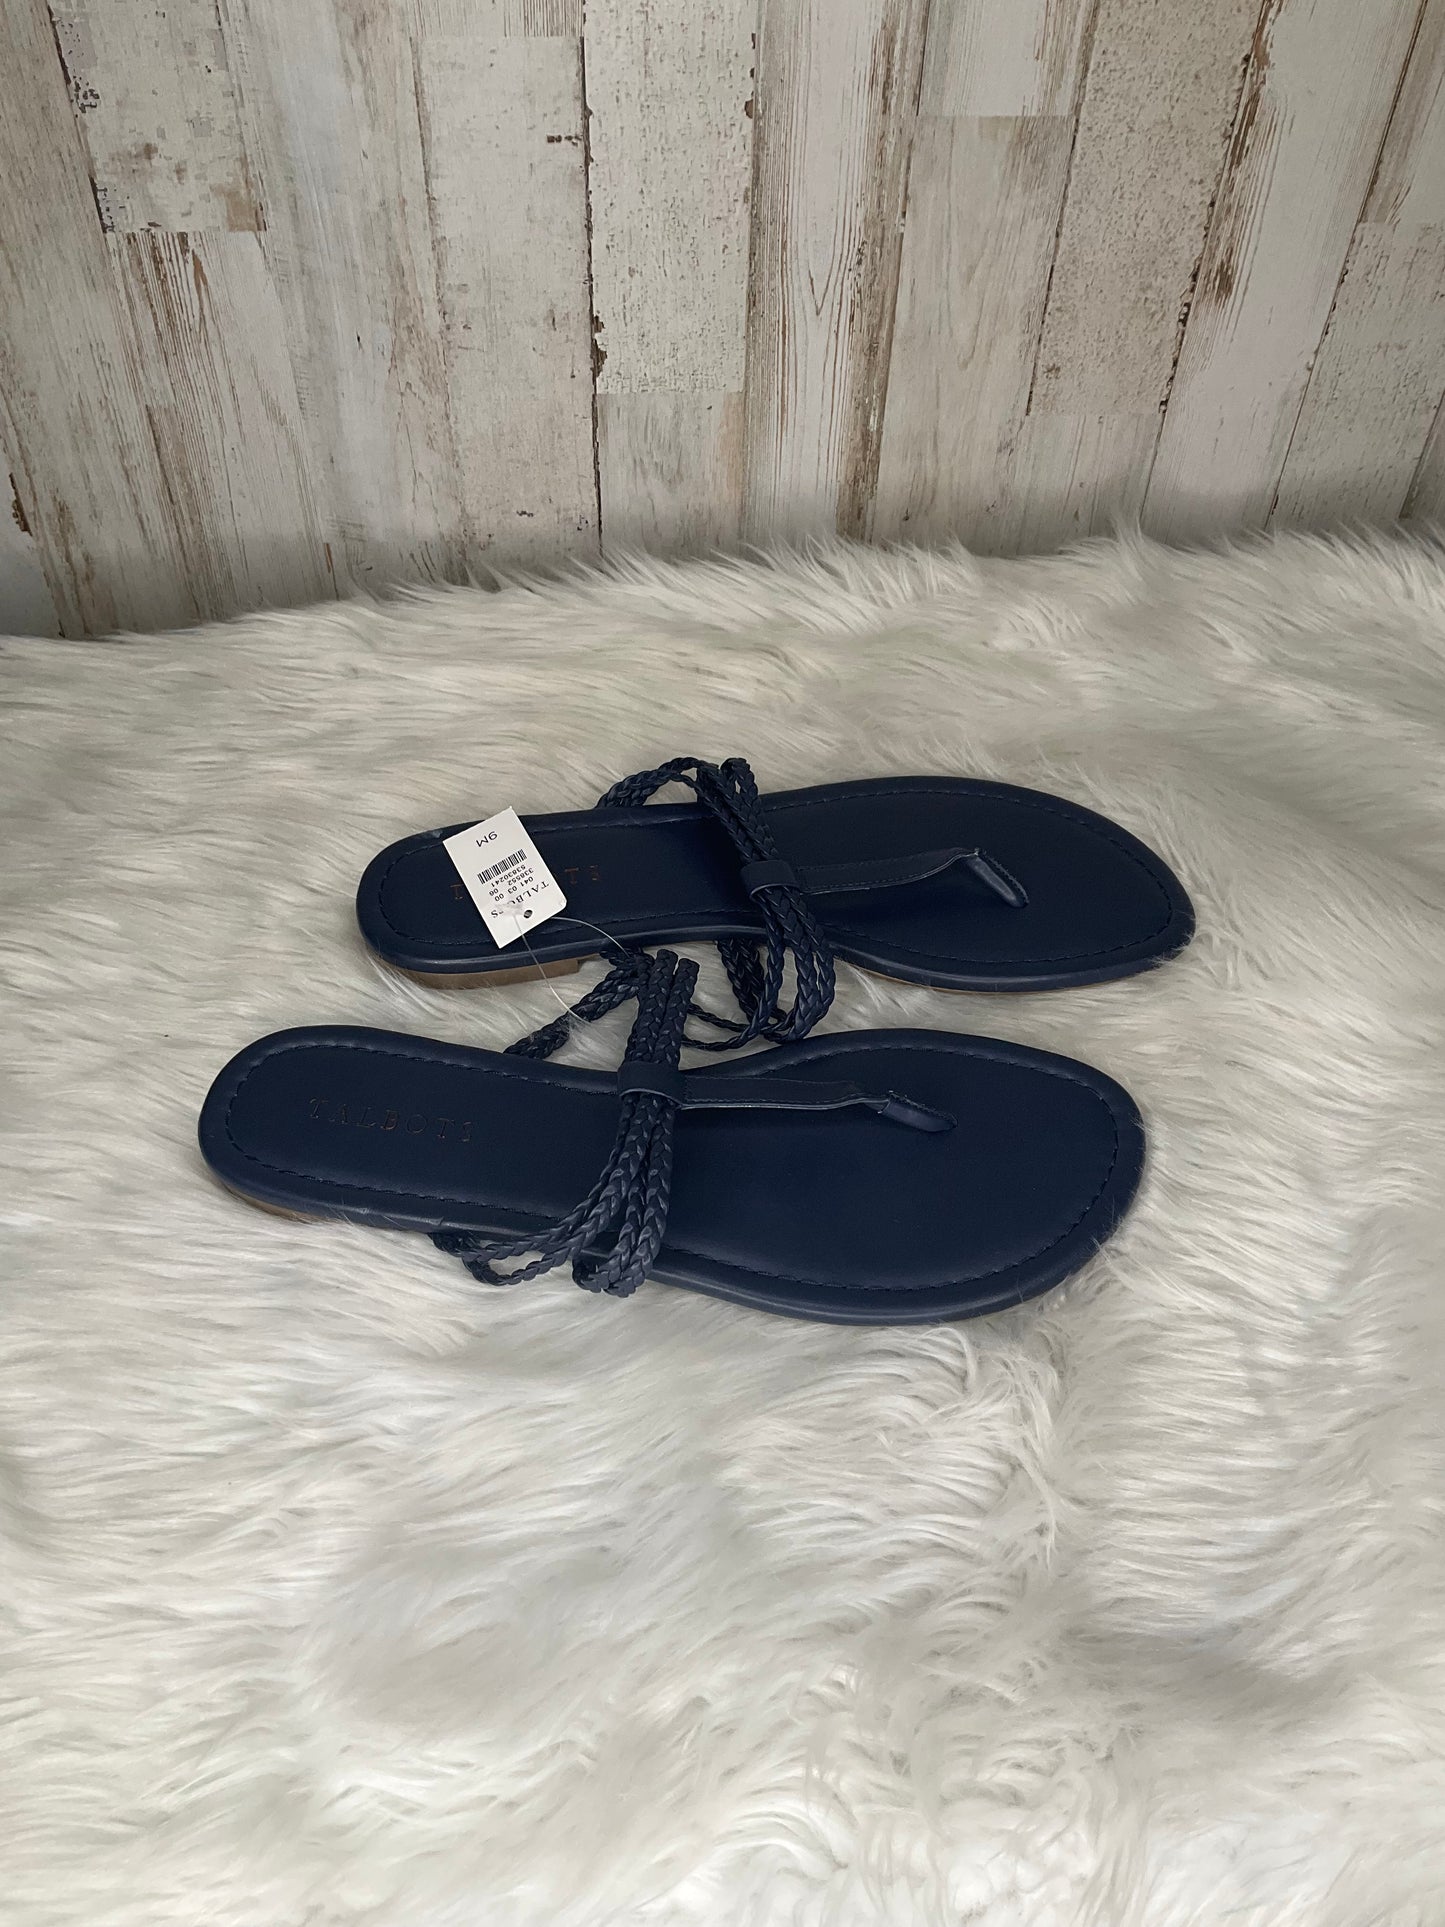 Sandals Flats By Talbots  Size: 9